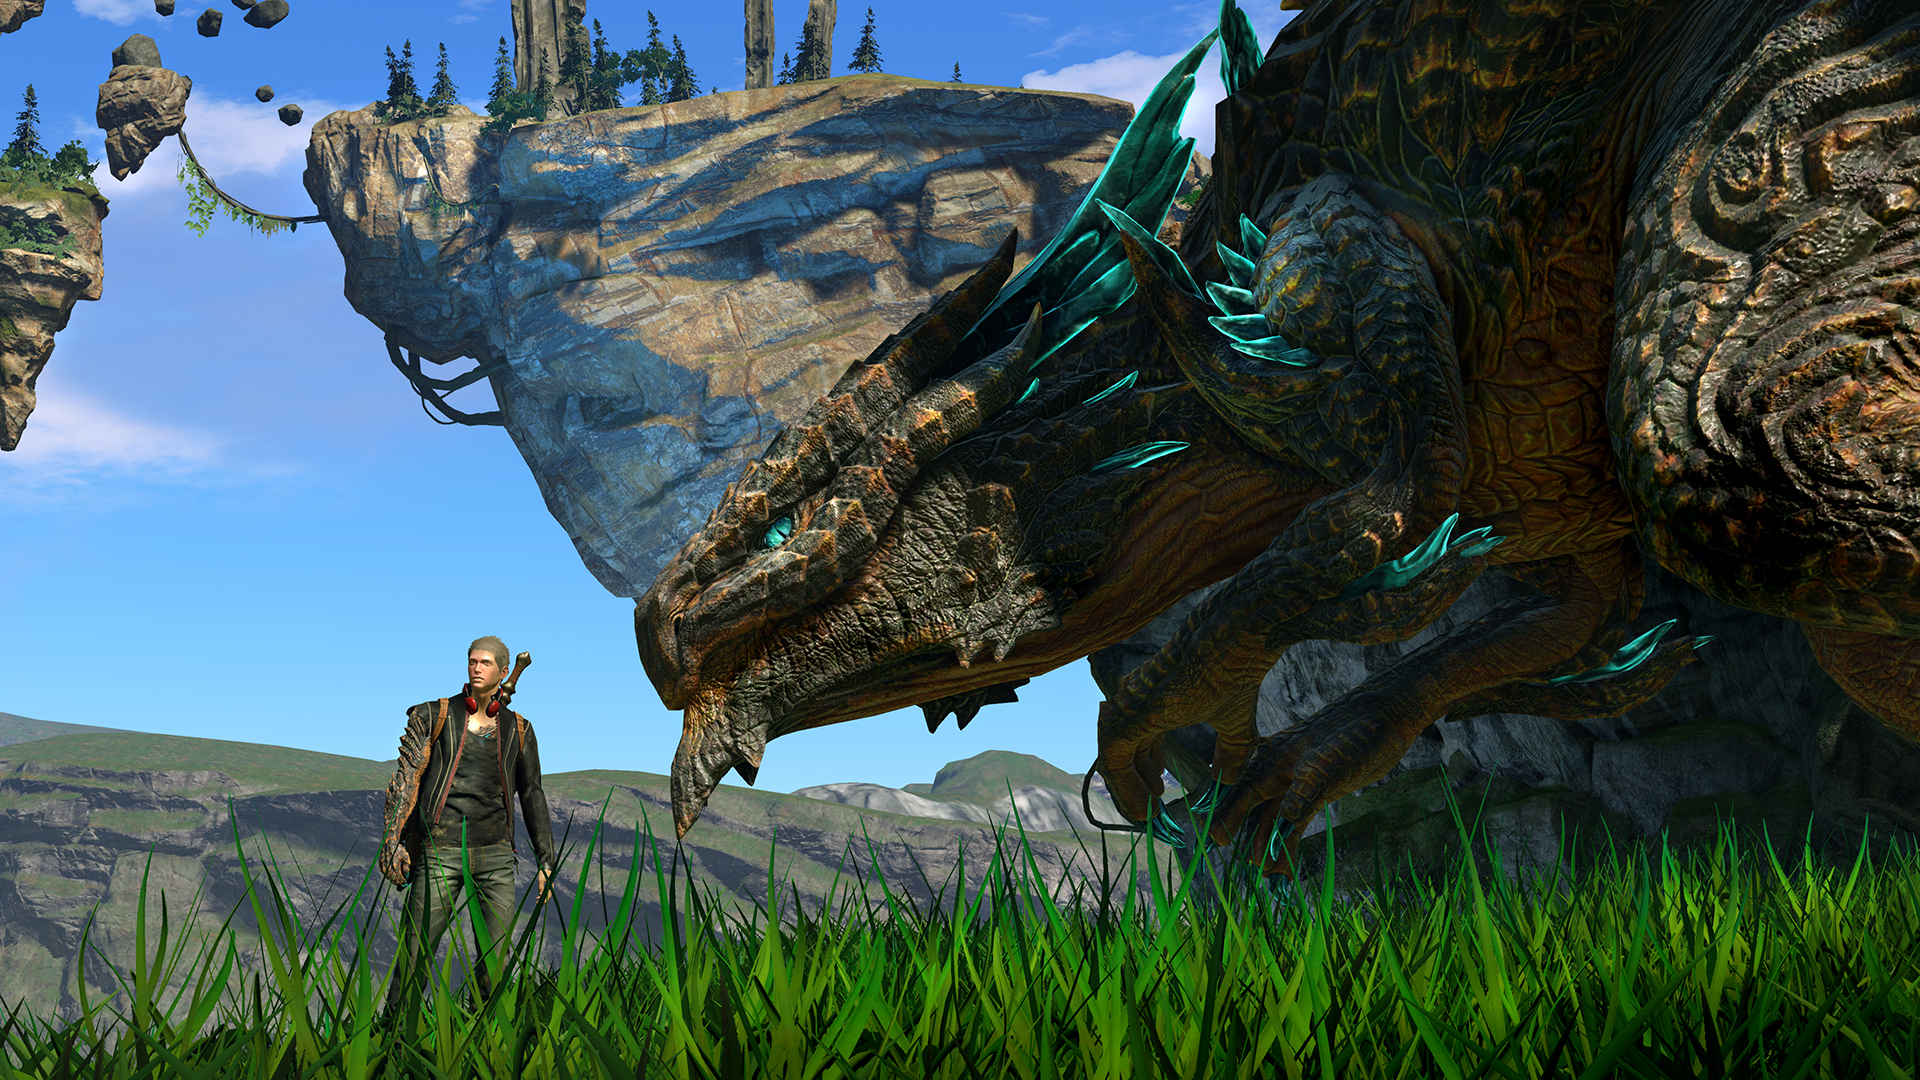  PlatinumGames wants to resurrect lost action game Scalebound 